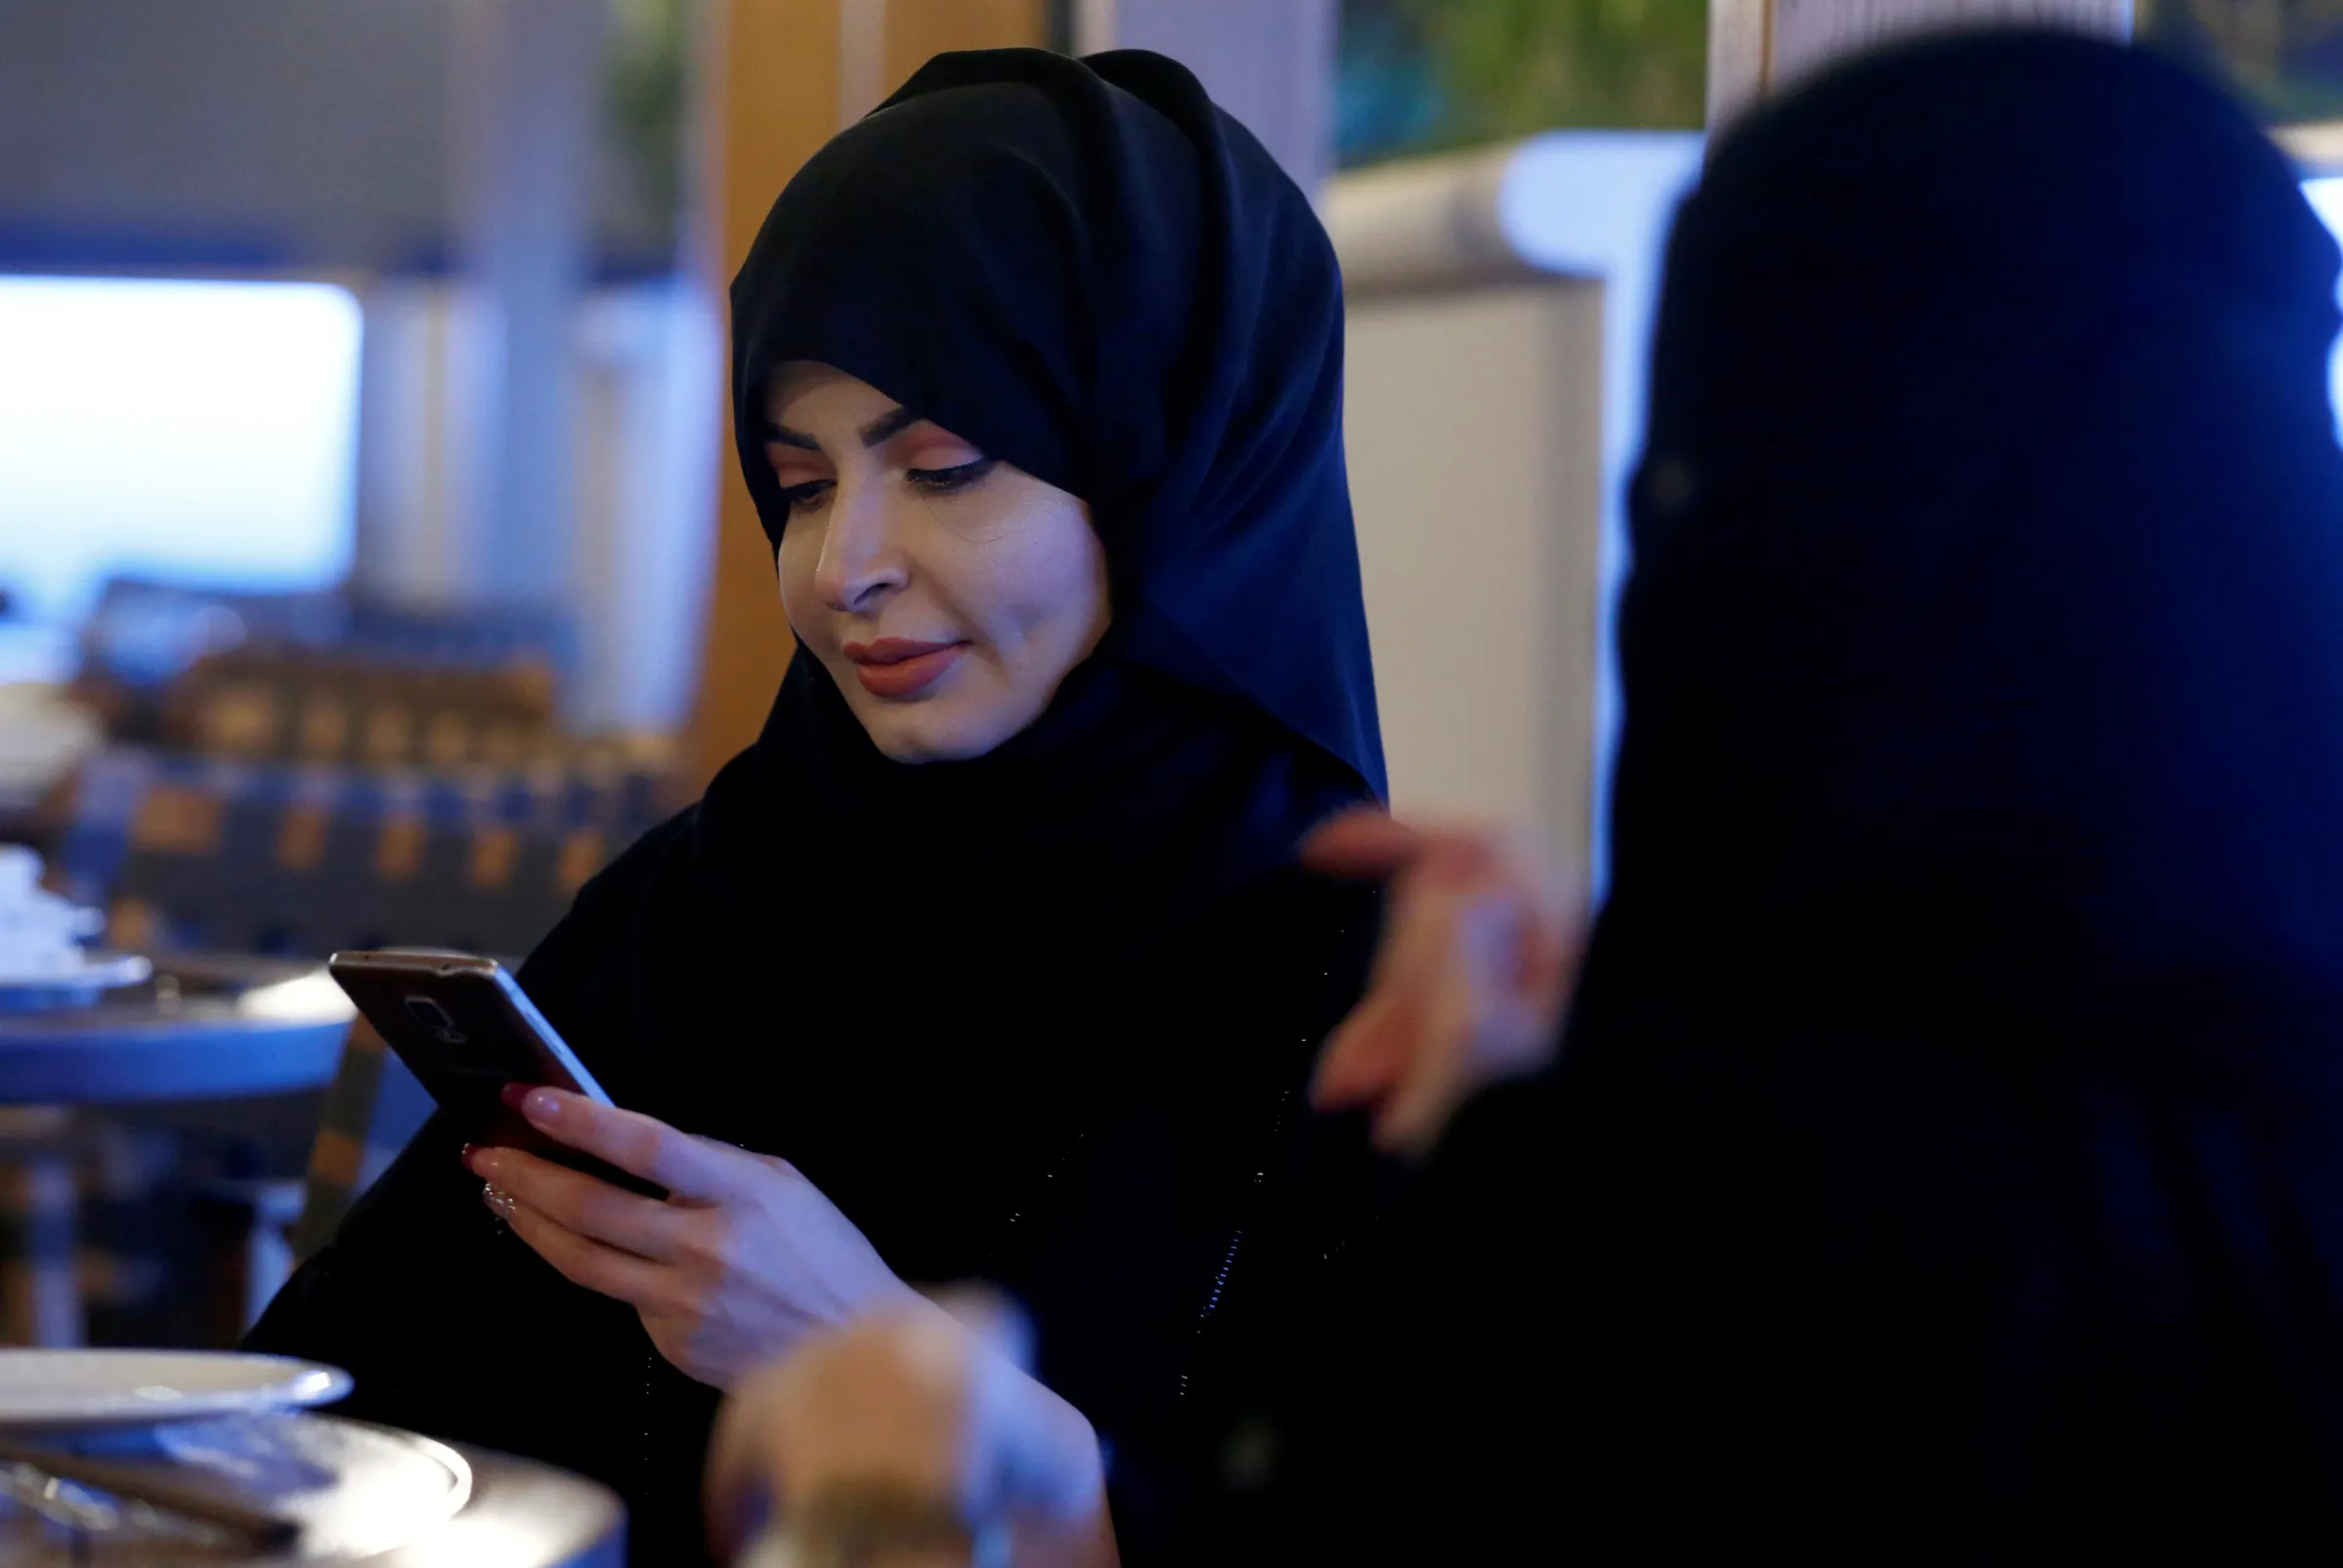 A woman uses her mobile phone in a cafe in Riyadh